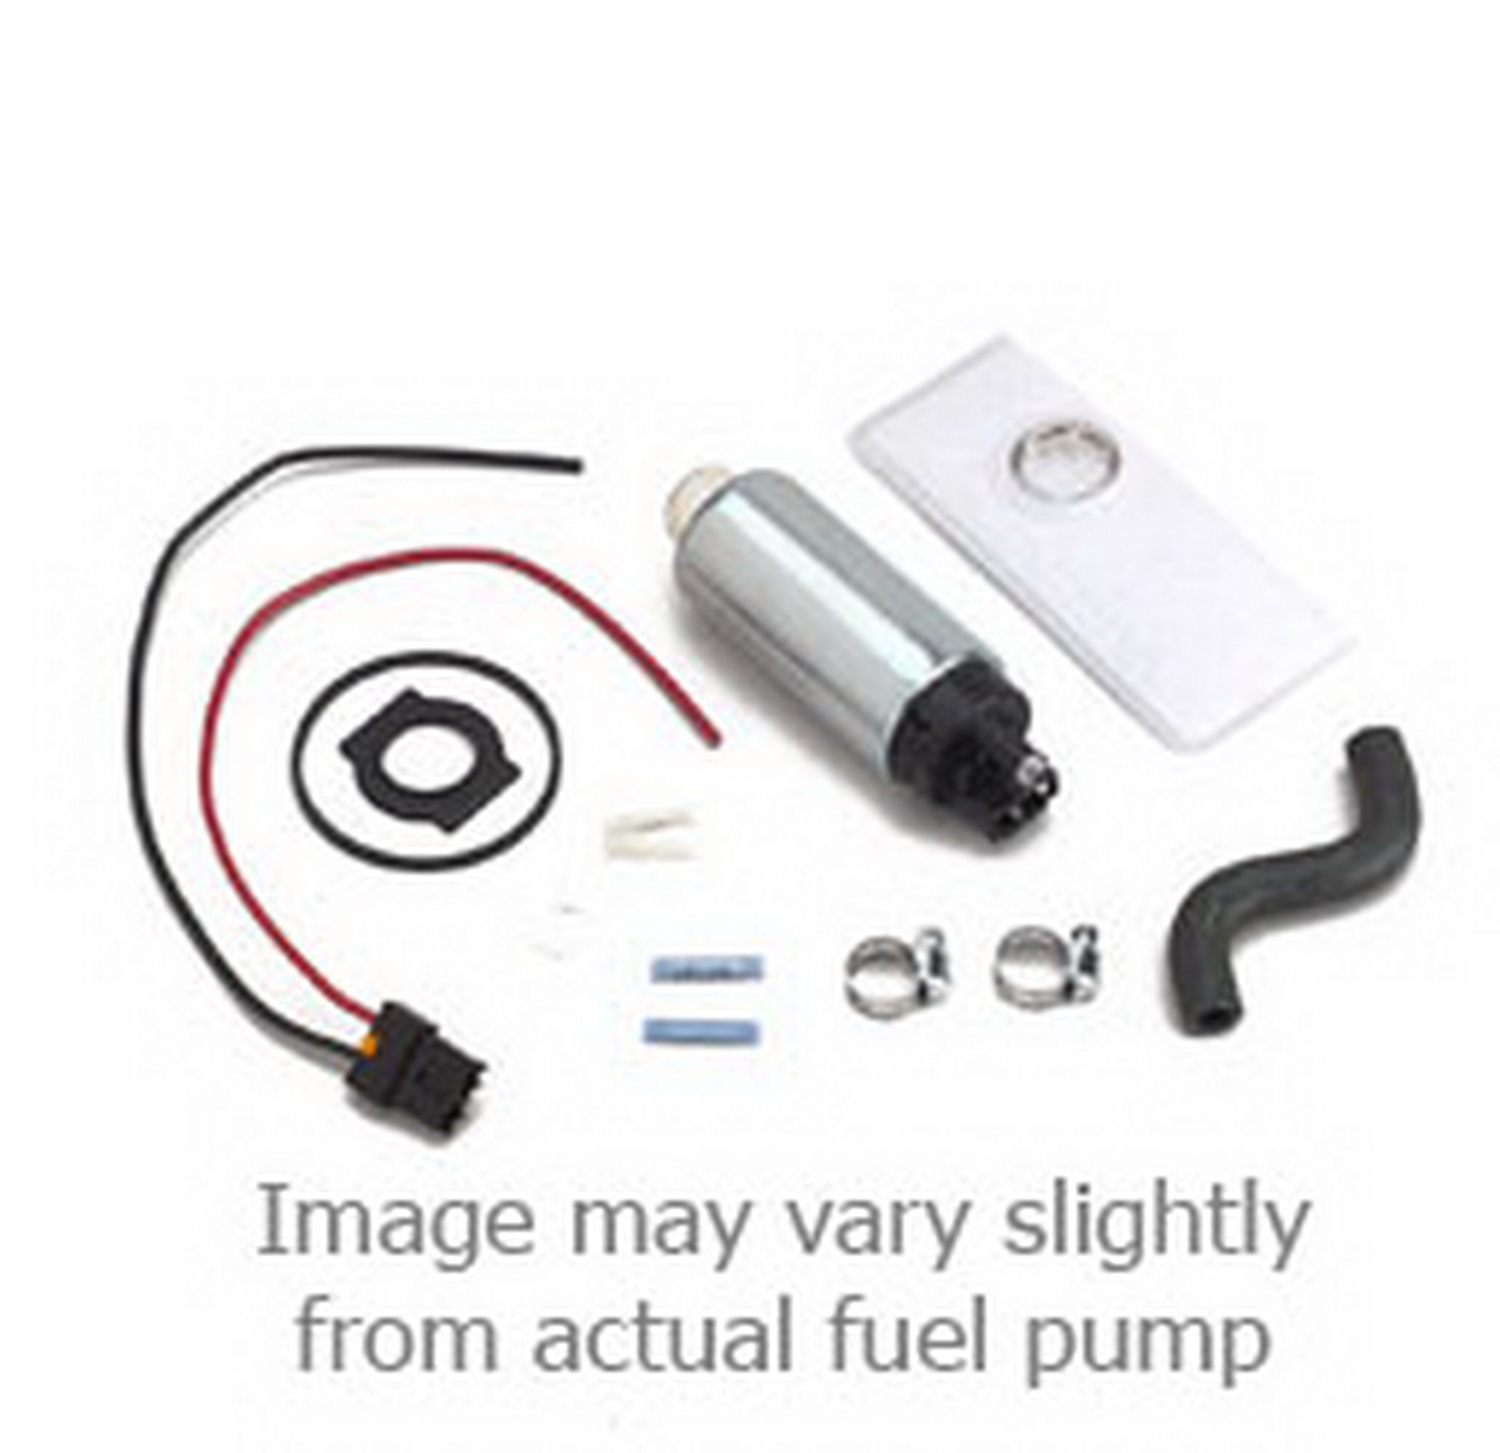 Holley Performance Holley Performance 12-918 Electric Fuel Pump; In-Tank Electric Fuel Pump